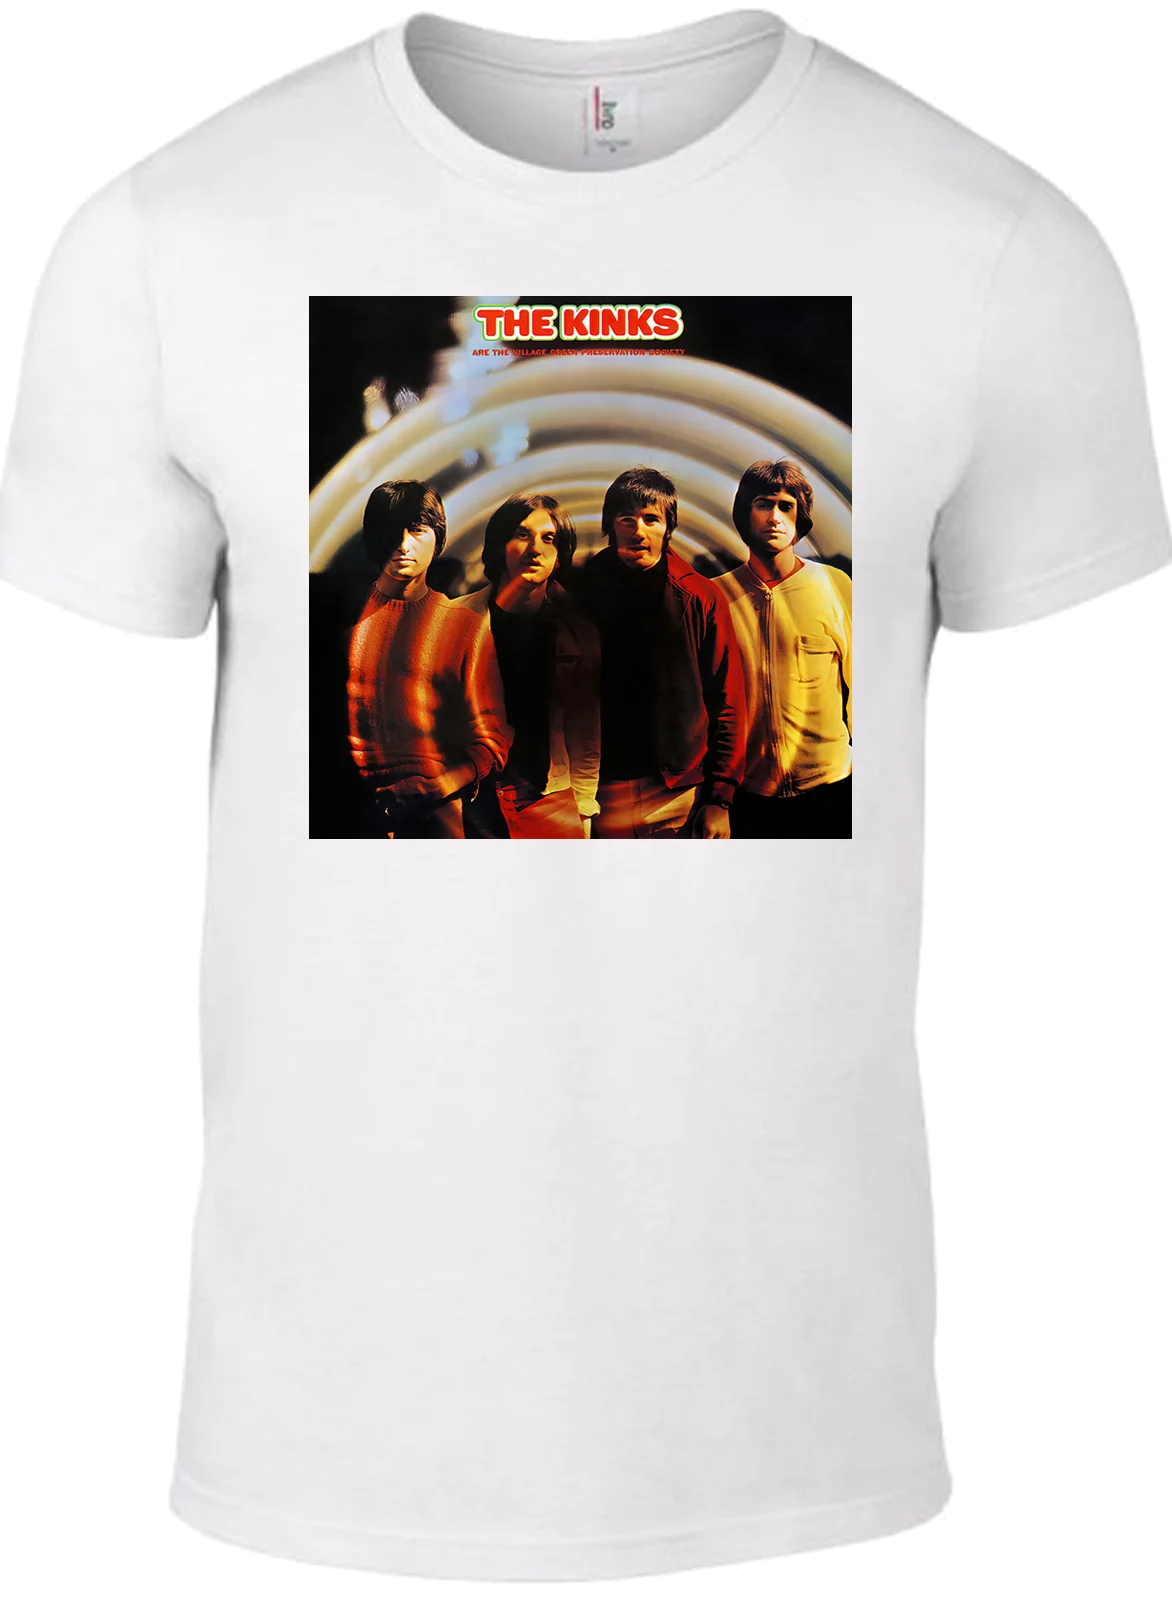 The KINKS T-shirt Really Got Me Ray Davies cd vinyl small faces who mod 1960s W 